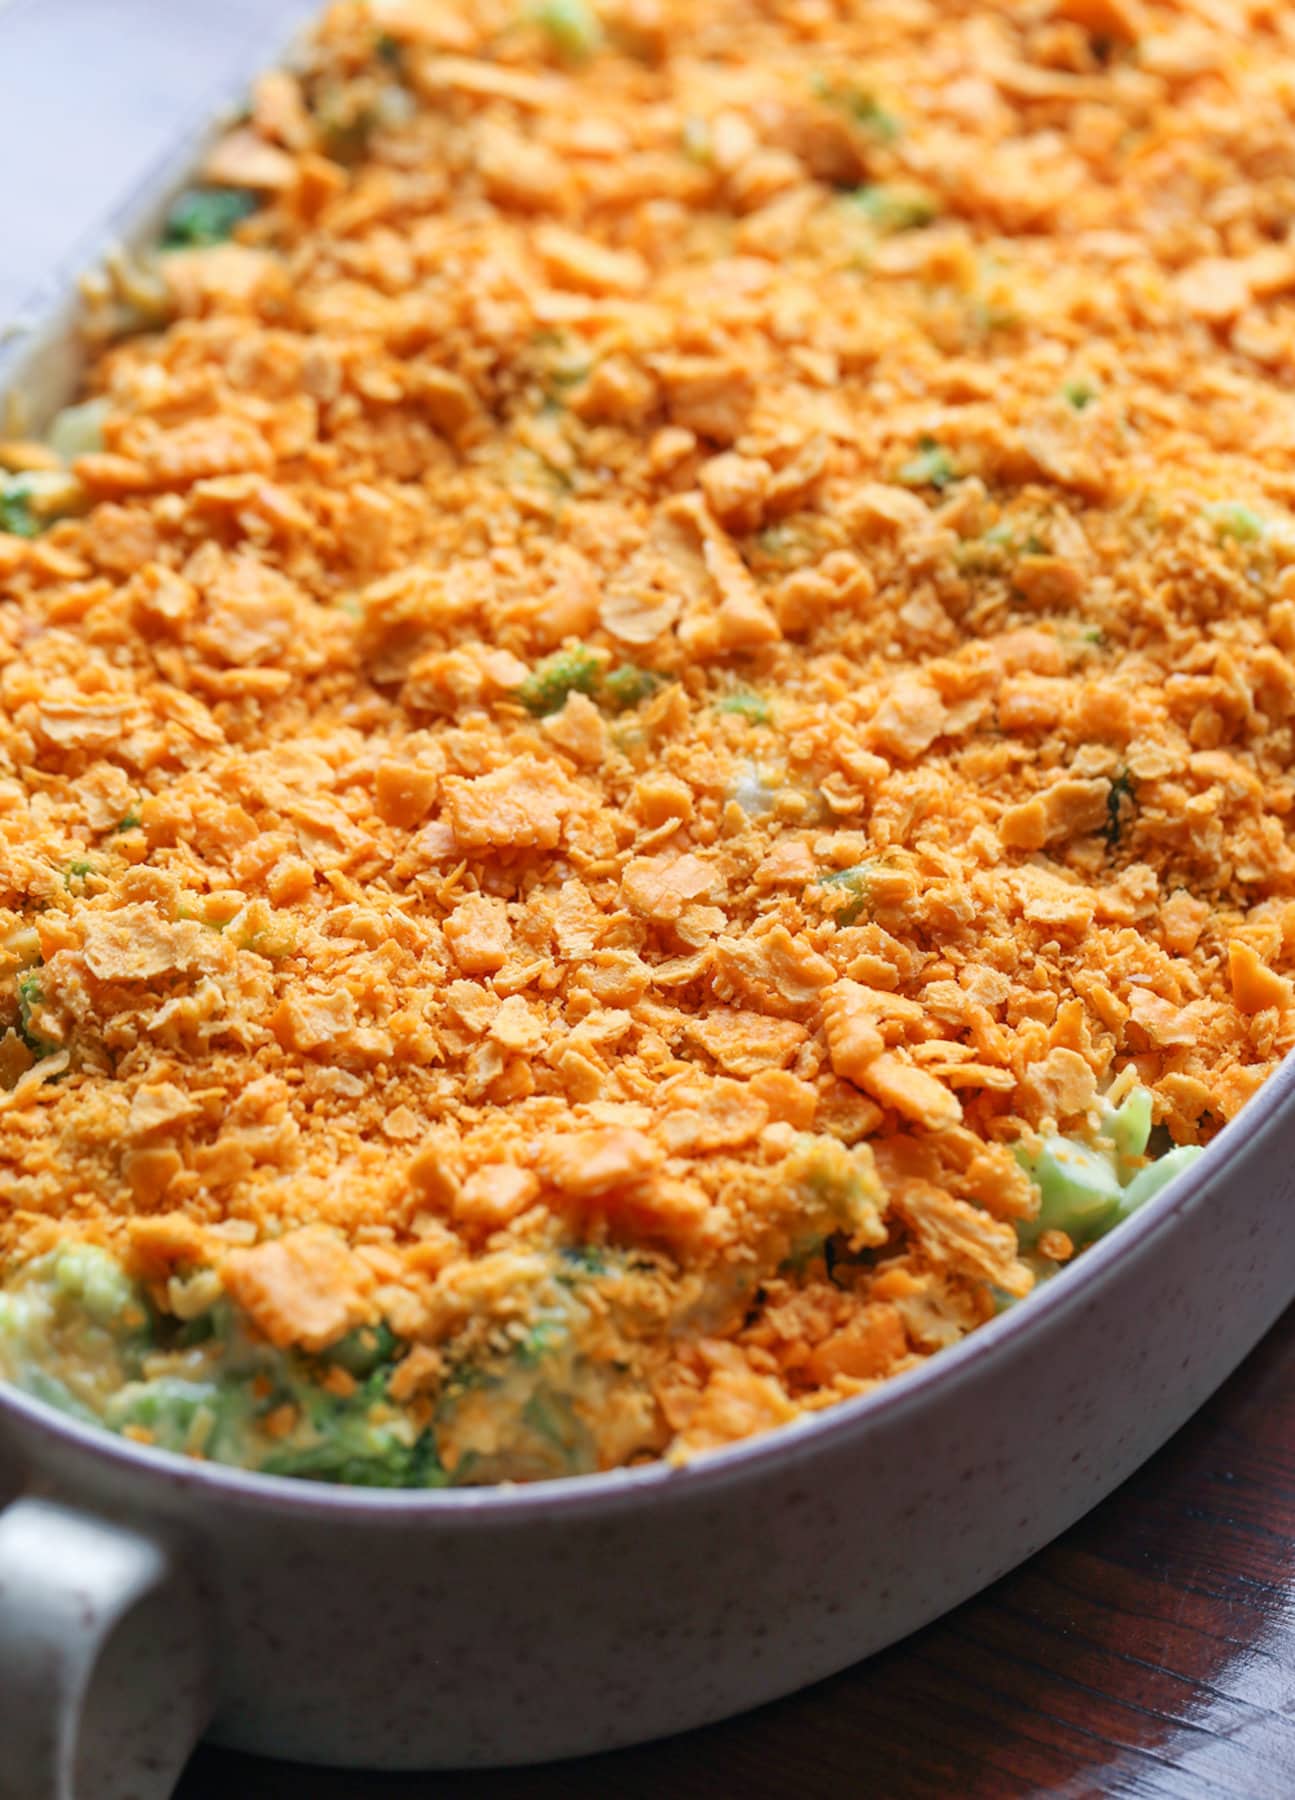 Broccoli and cheese casserole with crushed cheese crackers on top